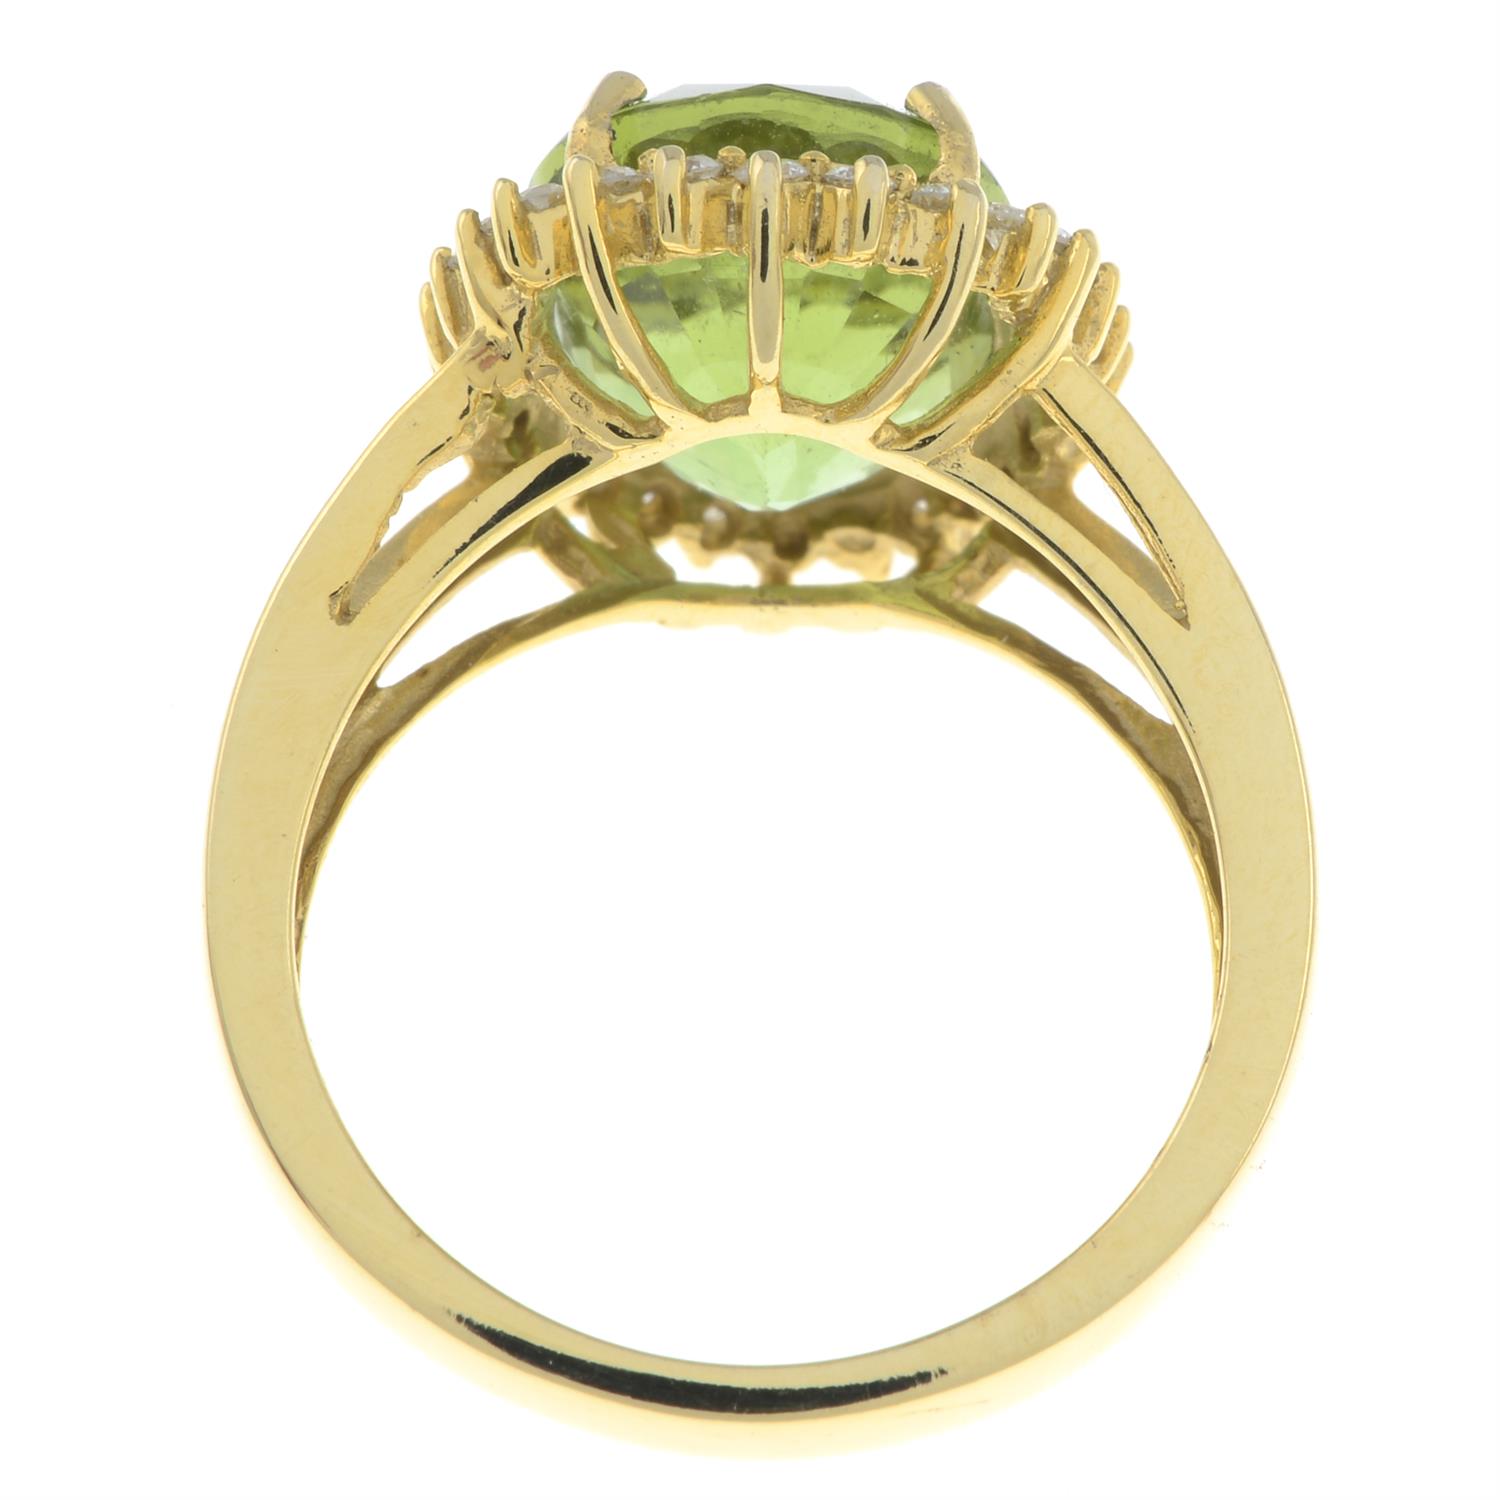 Green tourmaline and diamond cluster ring - Image 3 of 5